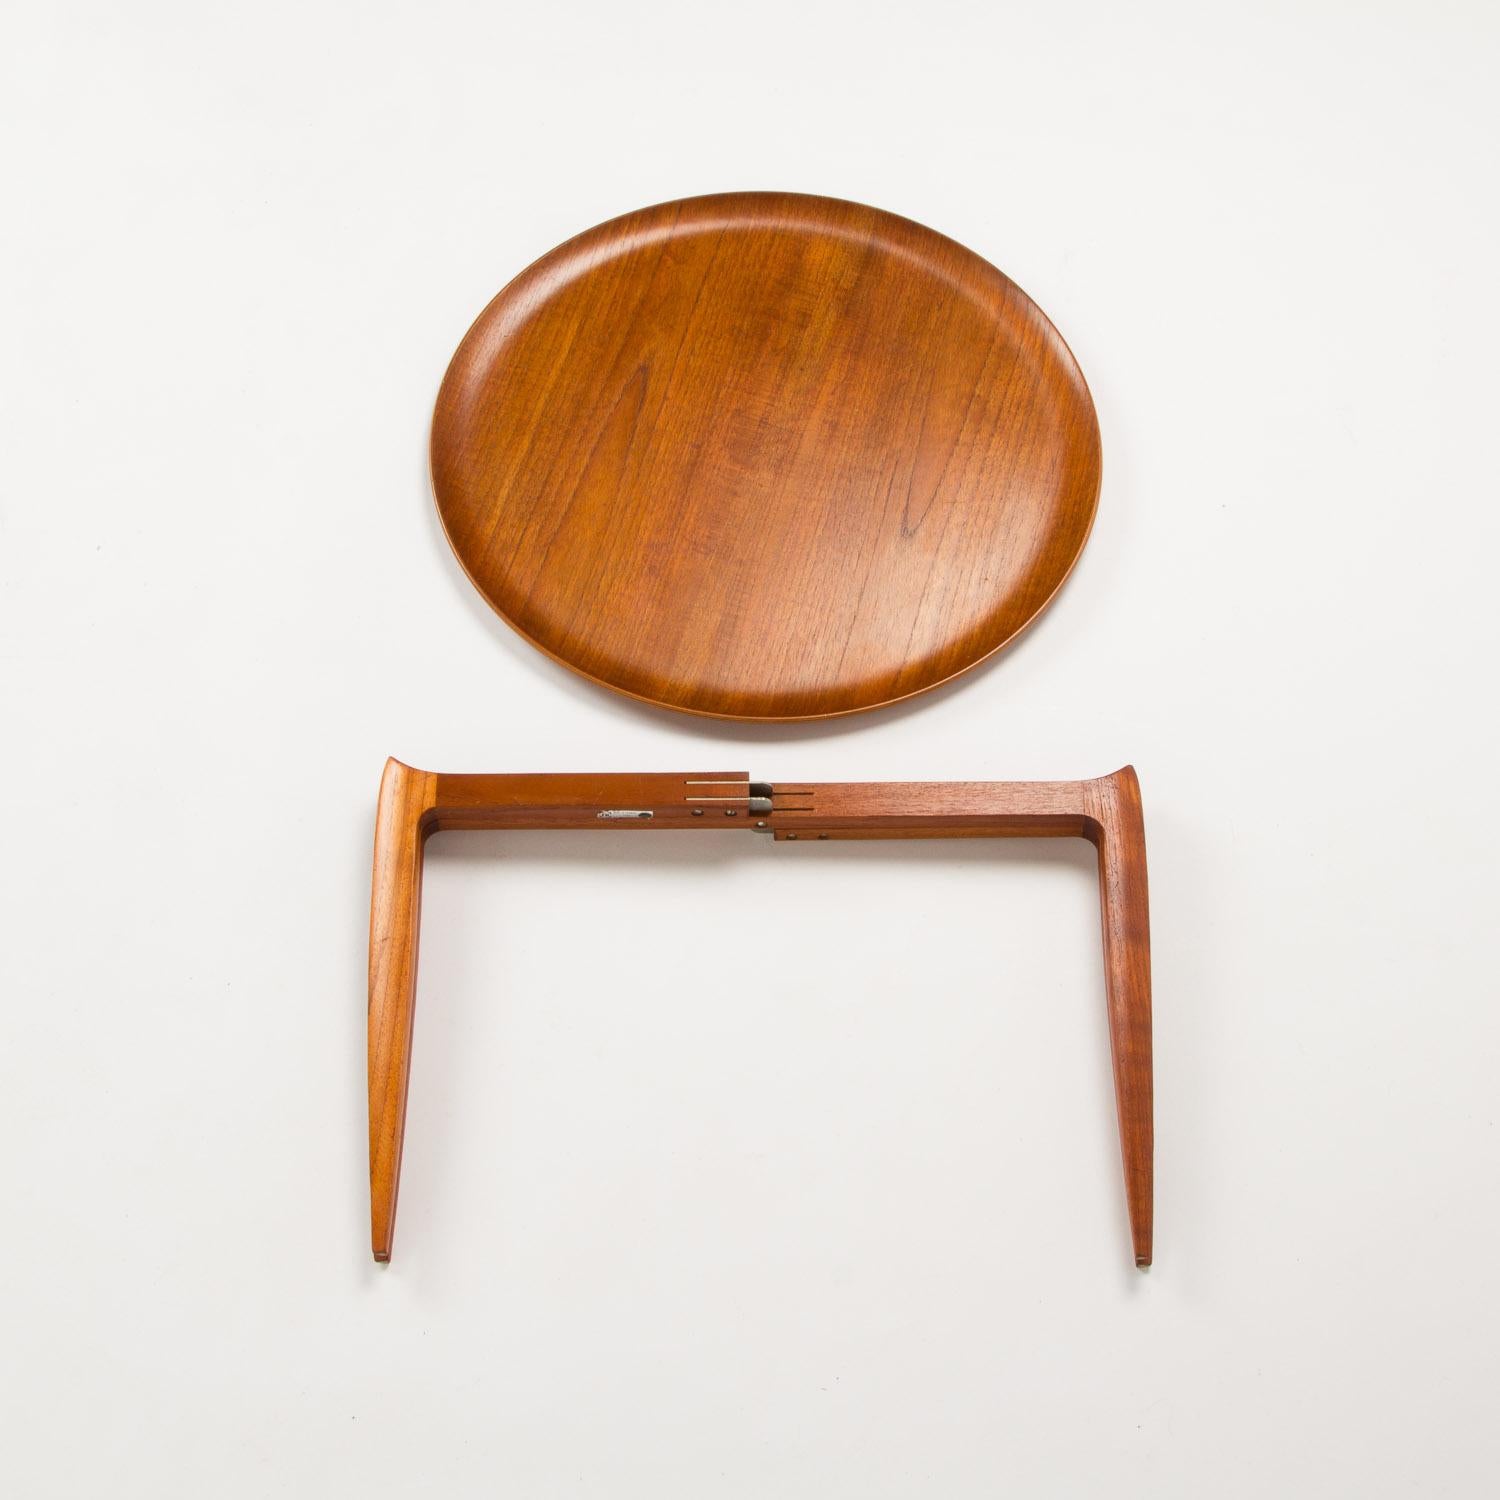 Mid-Century Modern Teak Tray Table by H Engholm and Svend Aage Willumsen for Fritz Hansen, Denmark,